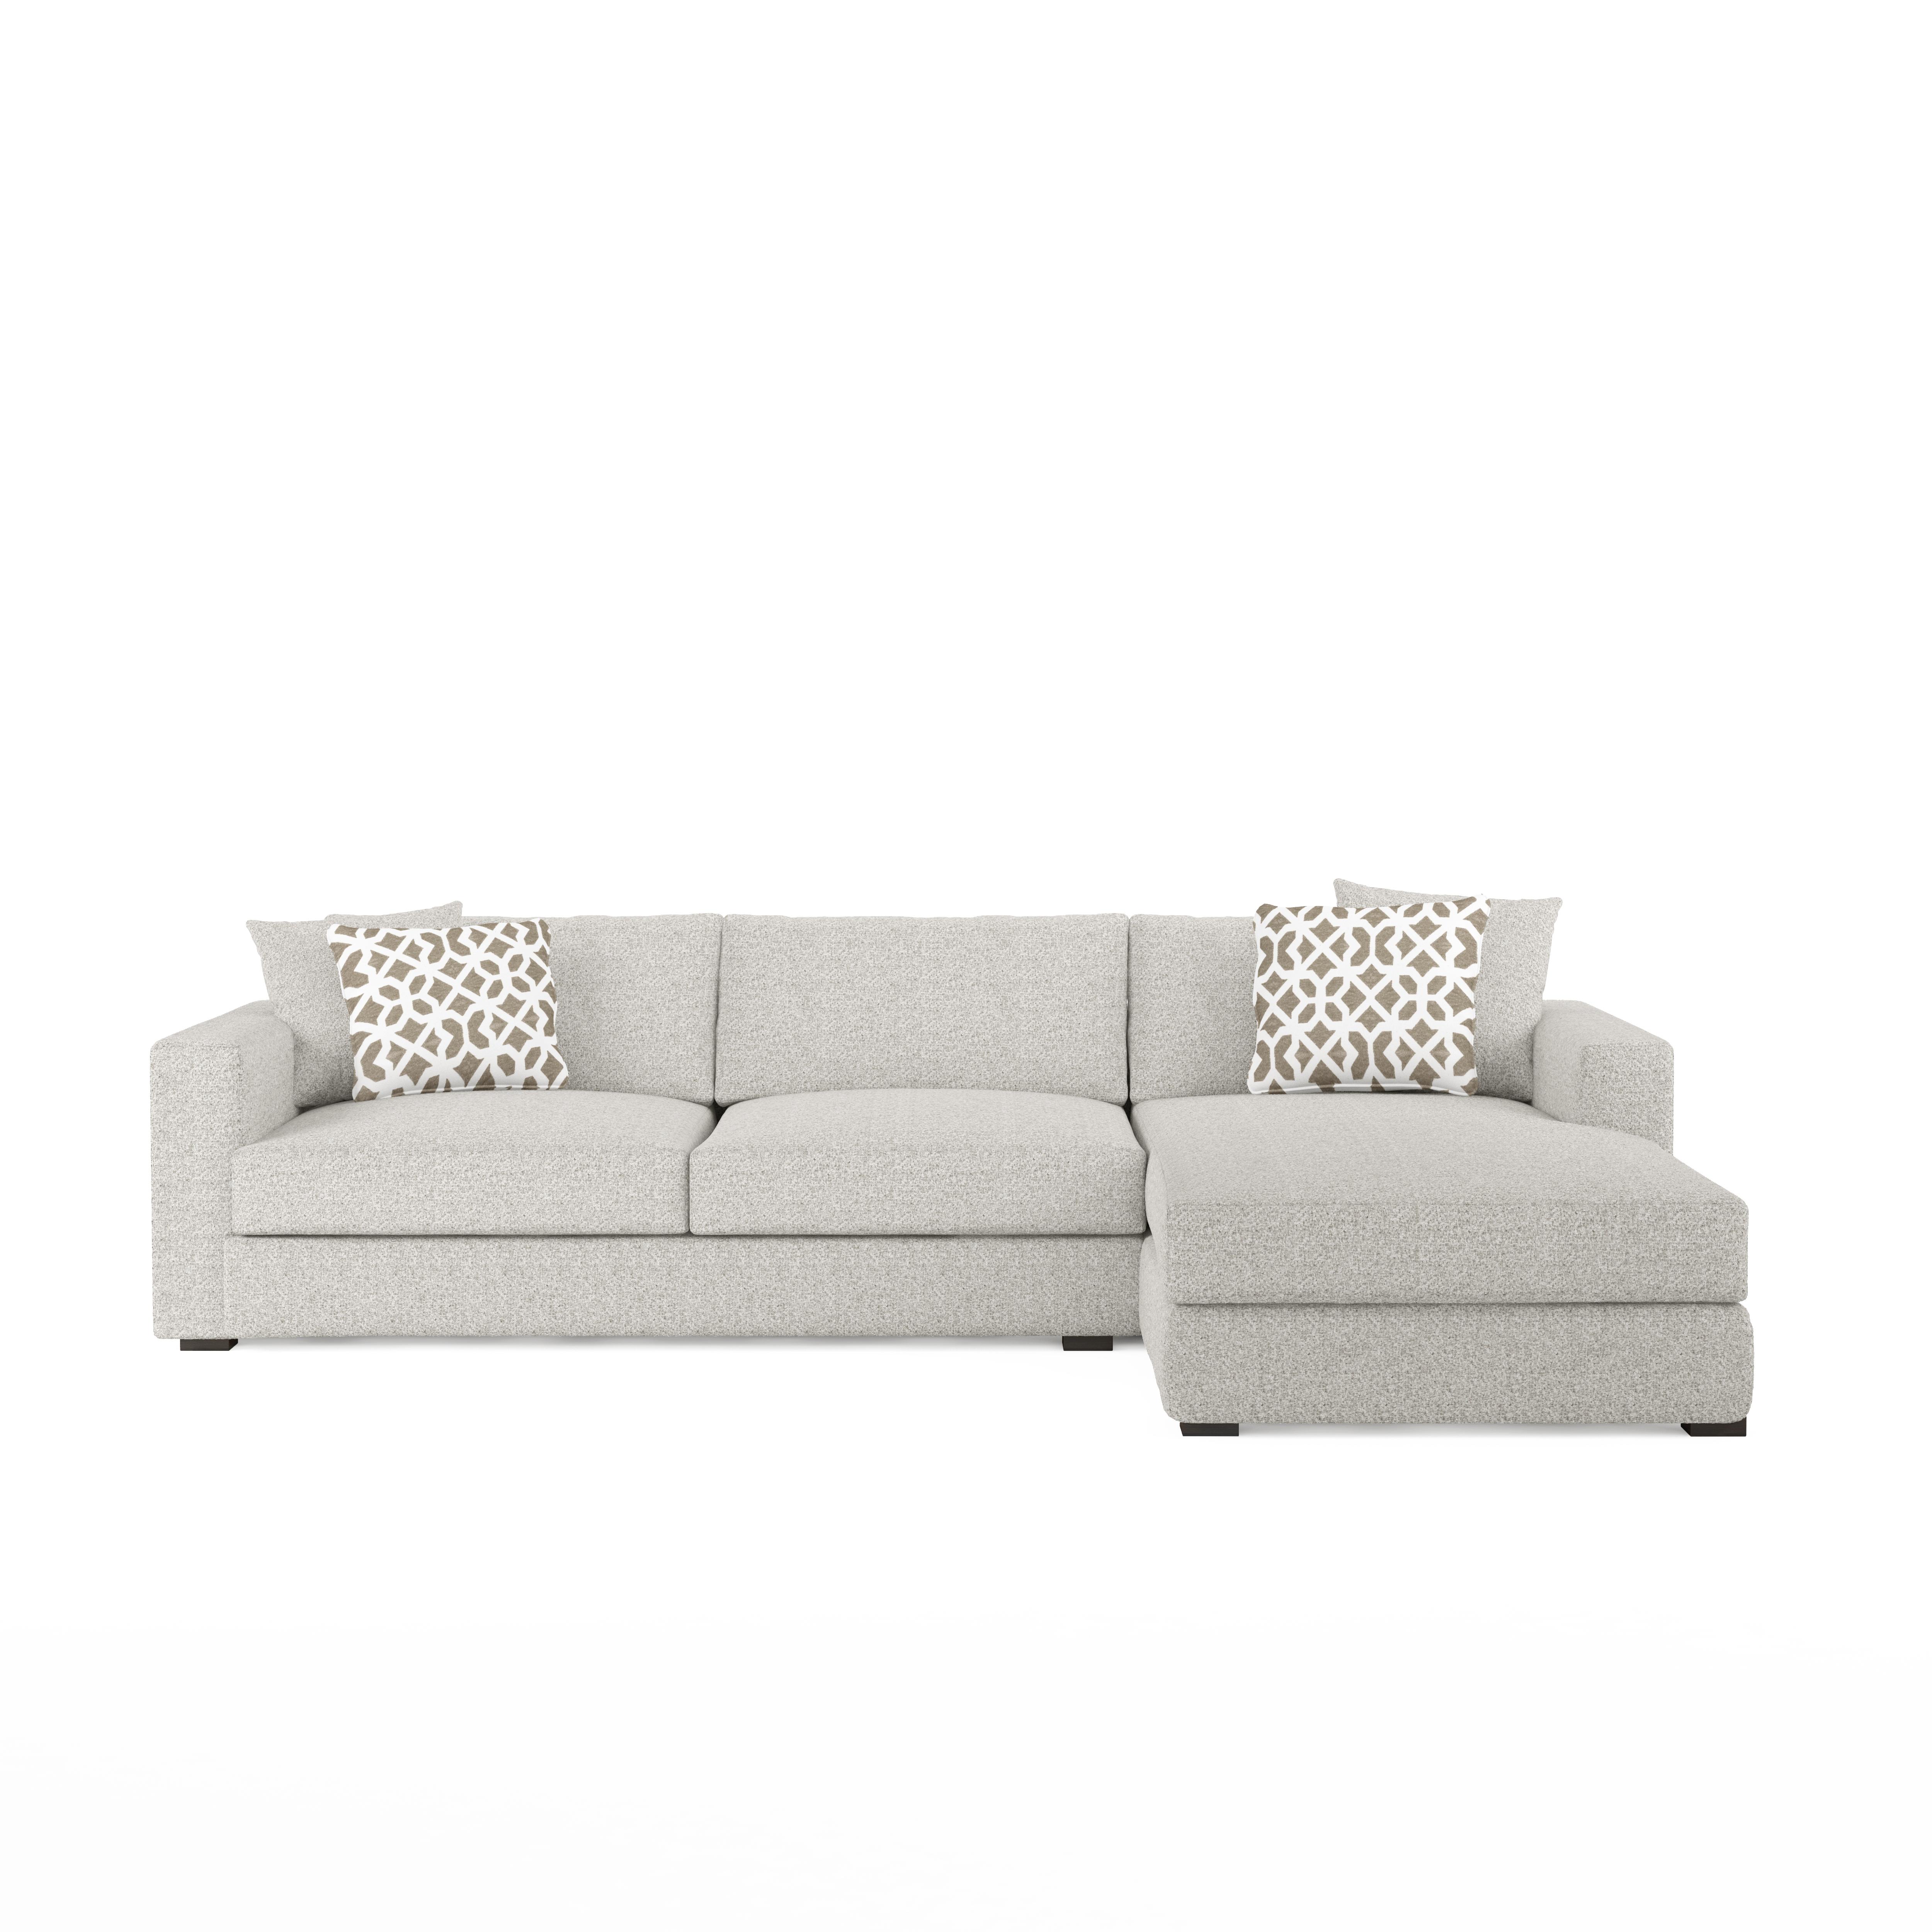 a.r.t. furniture Scully Ryden Sectional Sofa